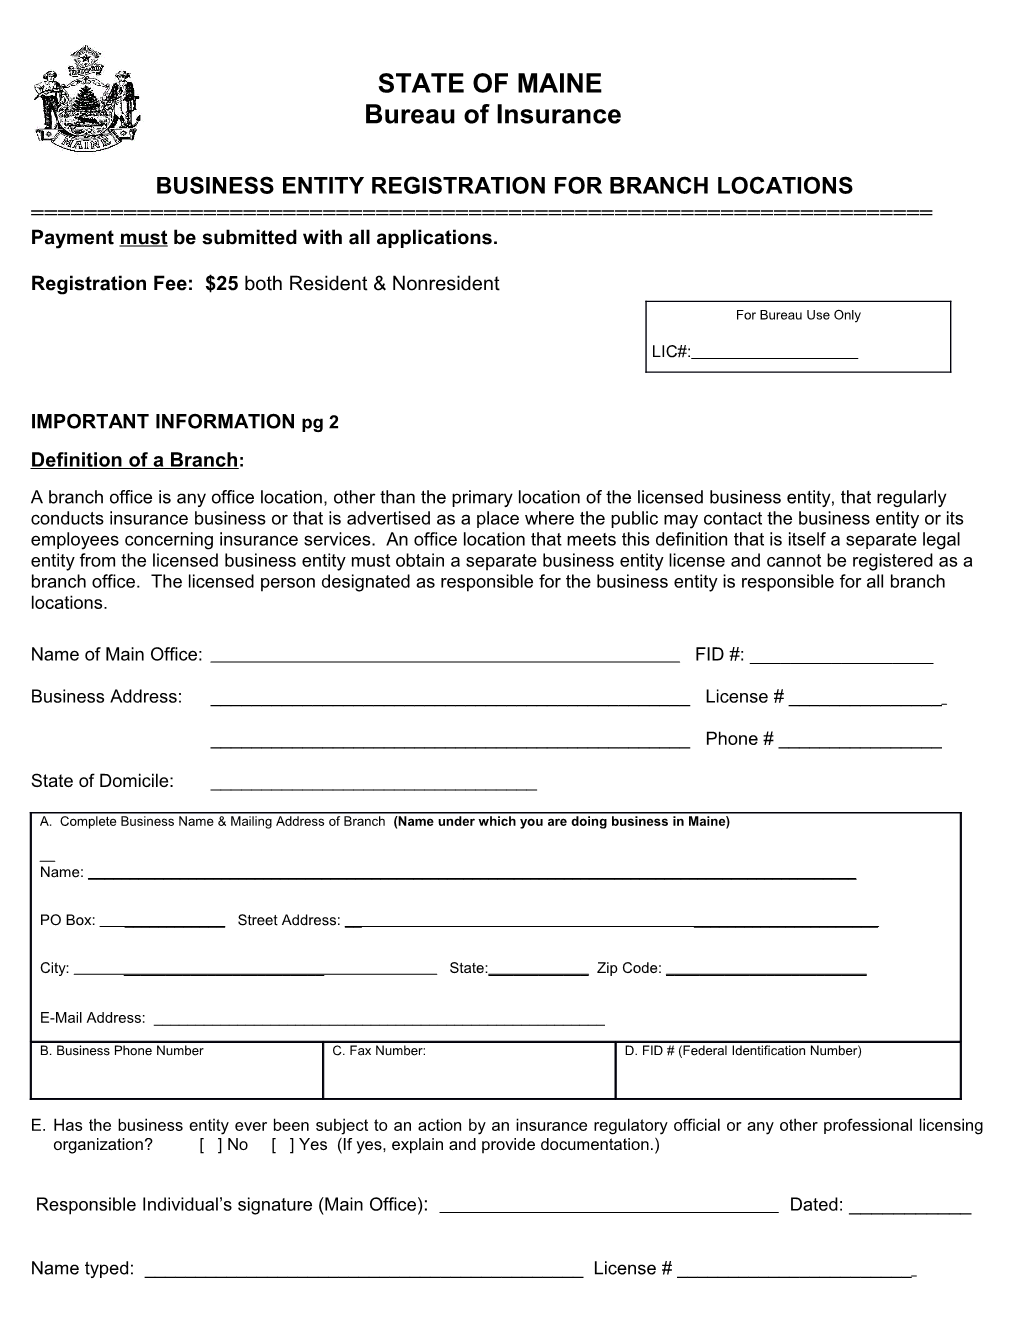 Business Entity Registration for Branch Locations